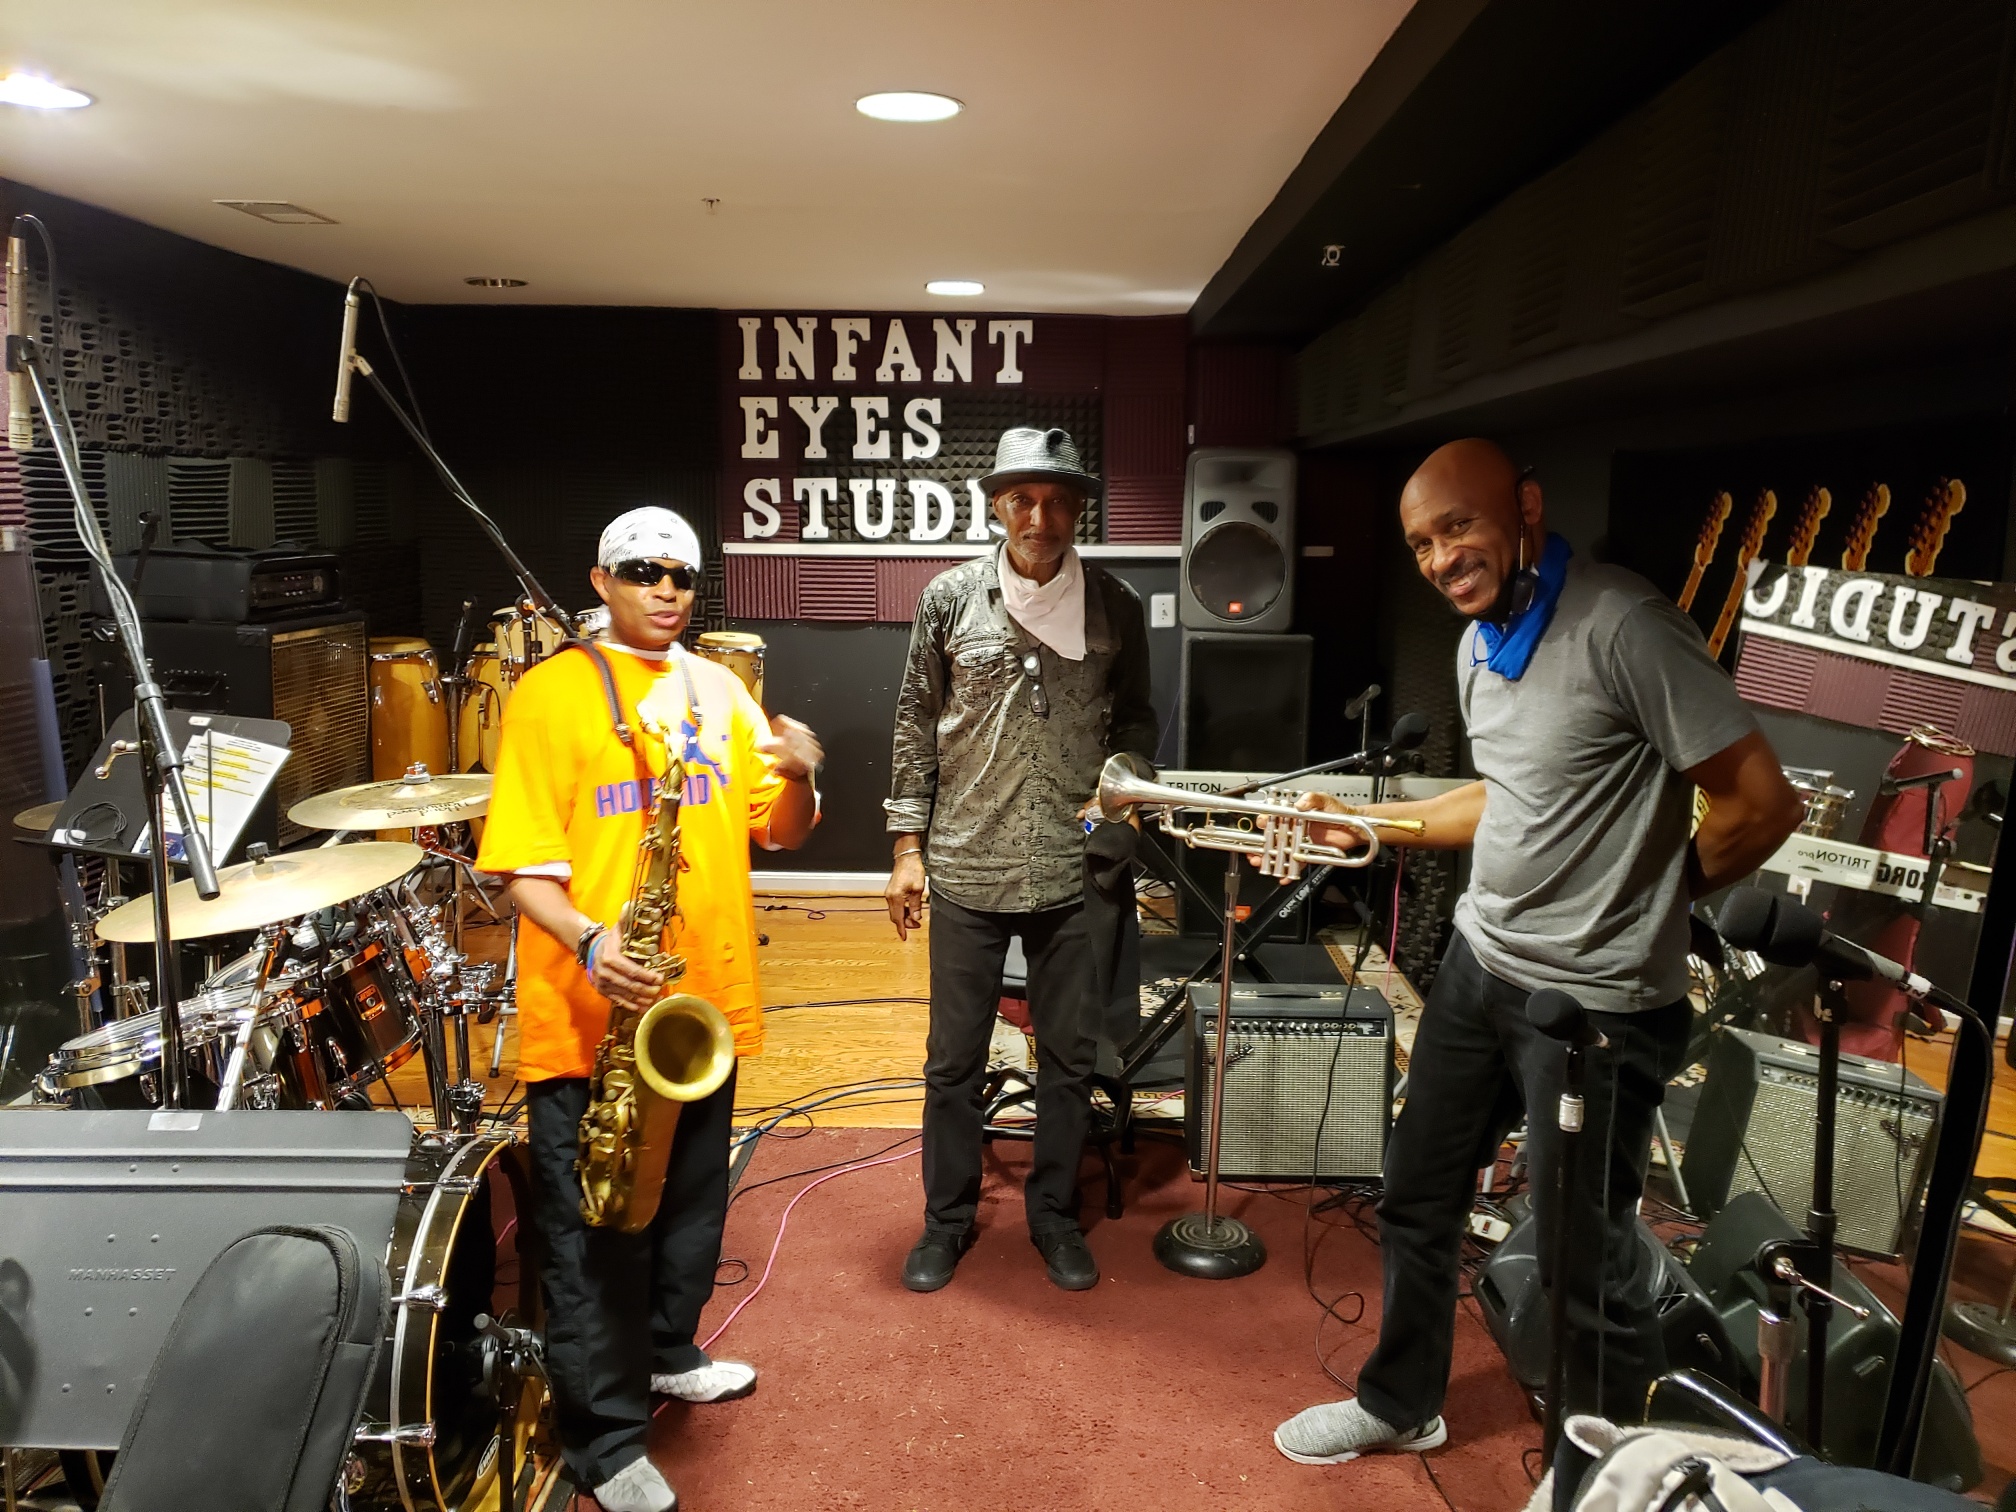 Johnny Long, Ignatius Mason and Buzzy Pindell hanging out in the Infant Eyes Studio